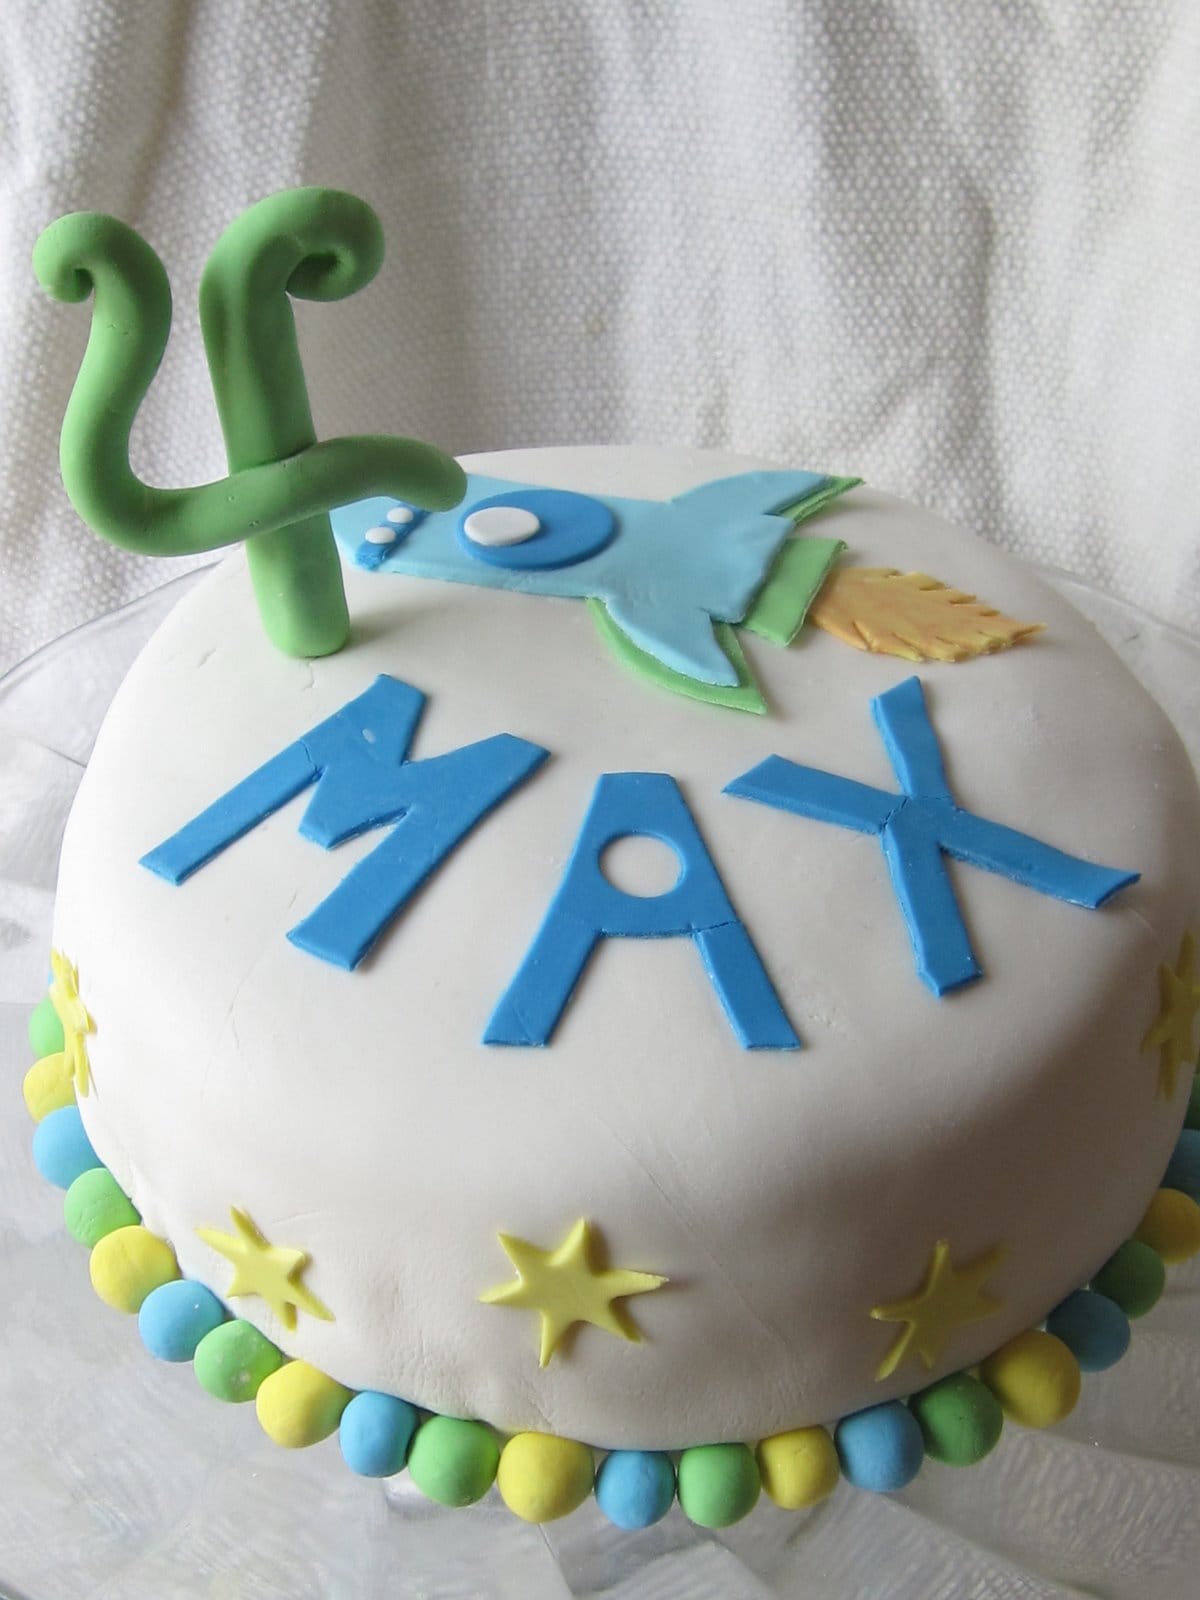 Space-themed birthday cake for Max